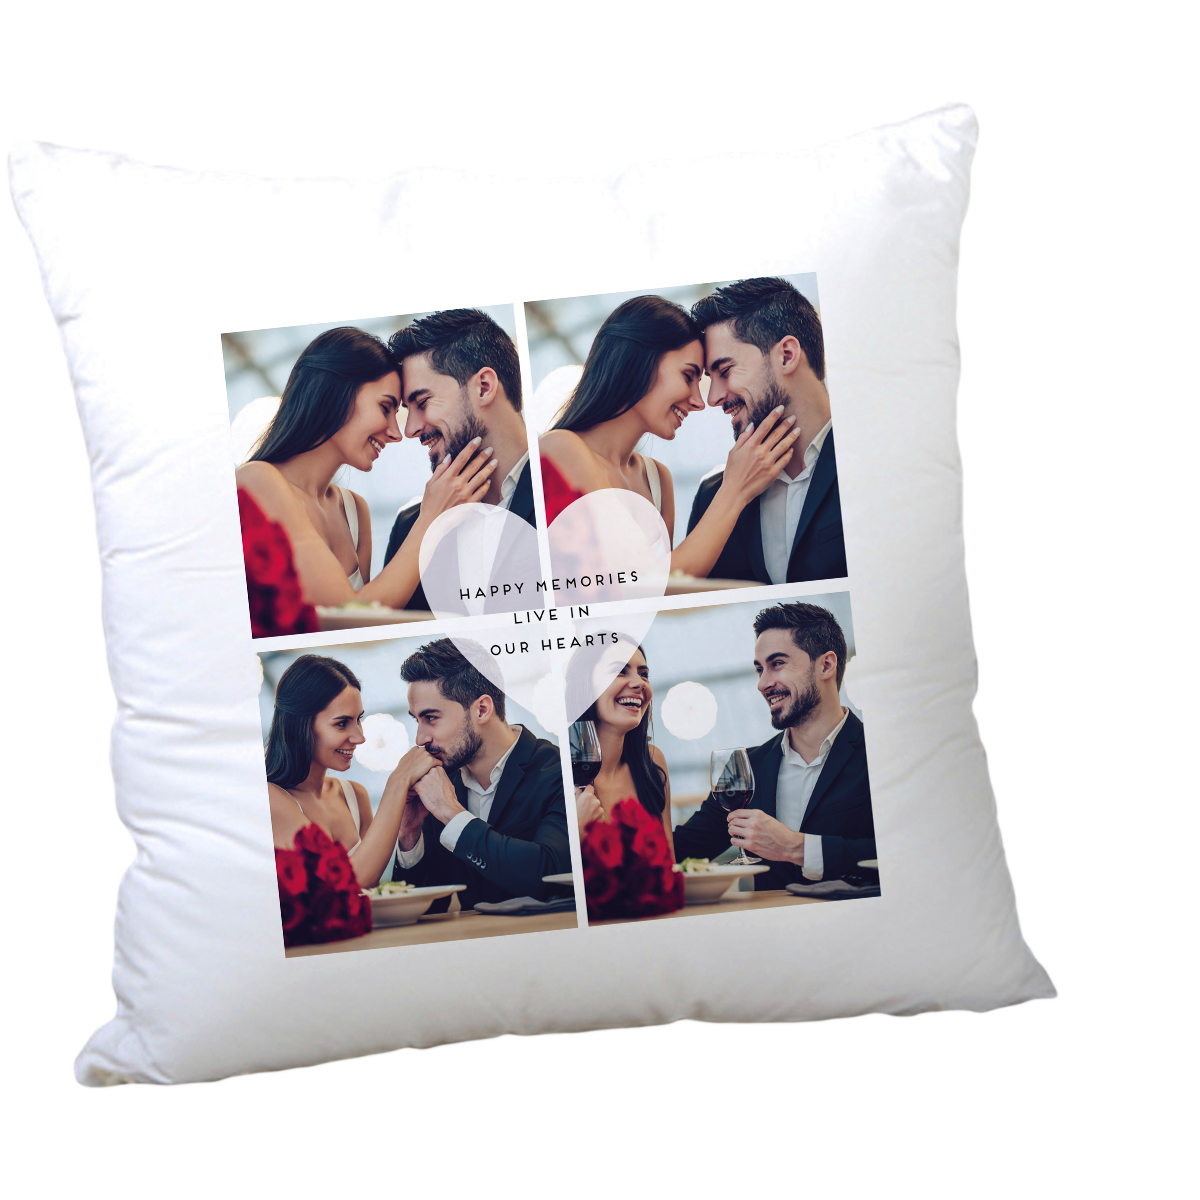 Multi Photo Valentine's Cushion - Happy Memories Live In Our Hearts